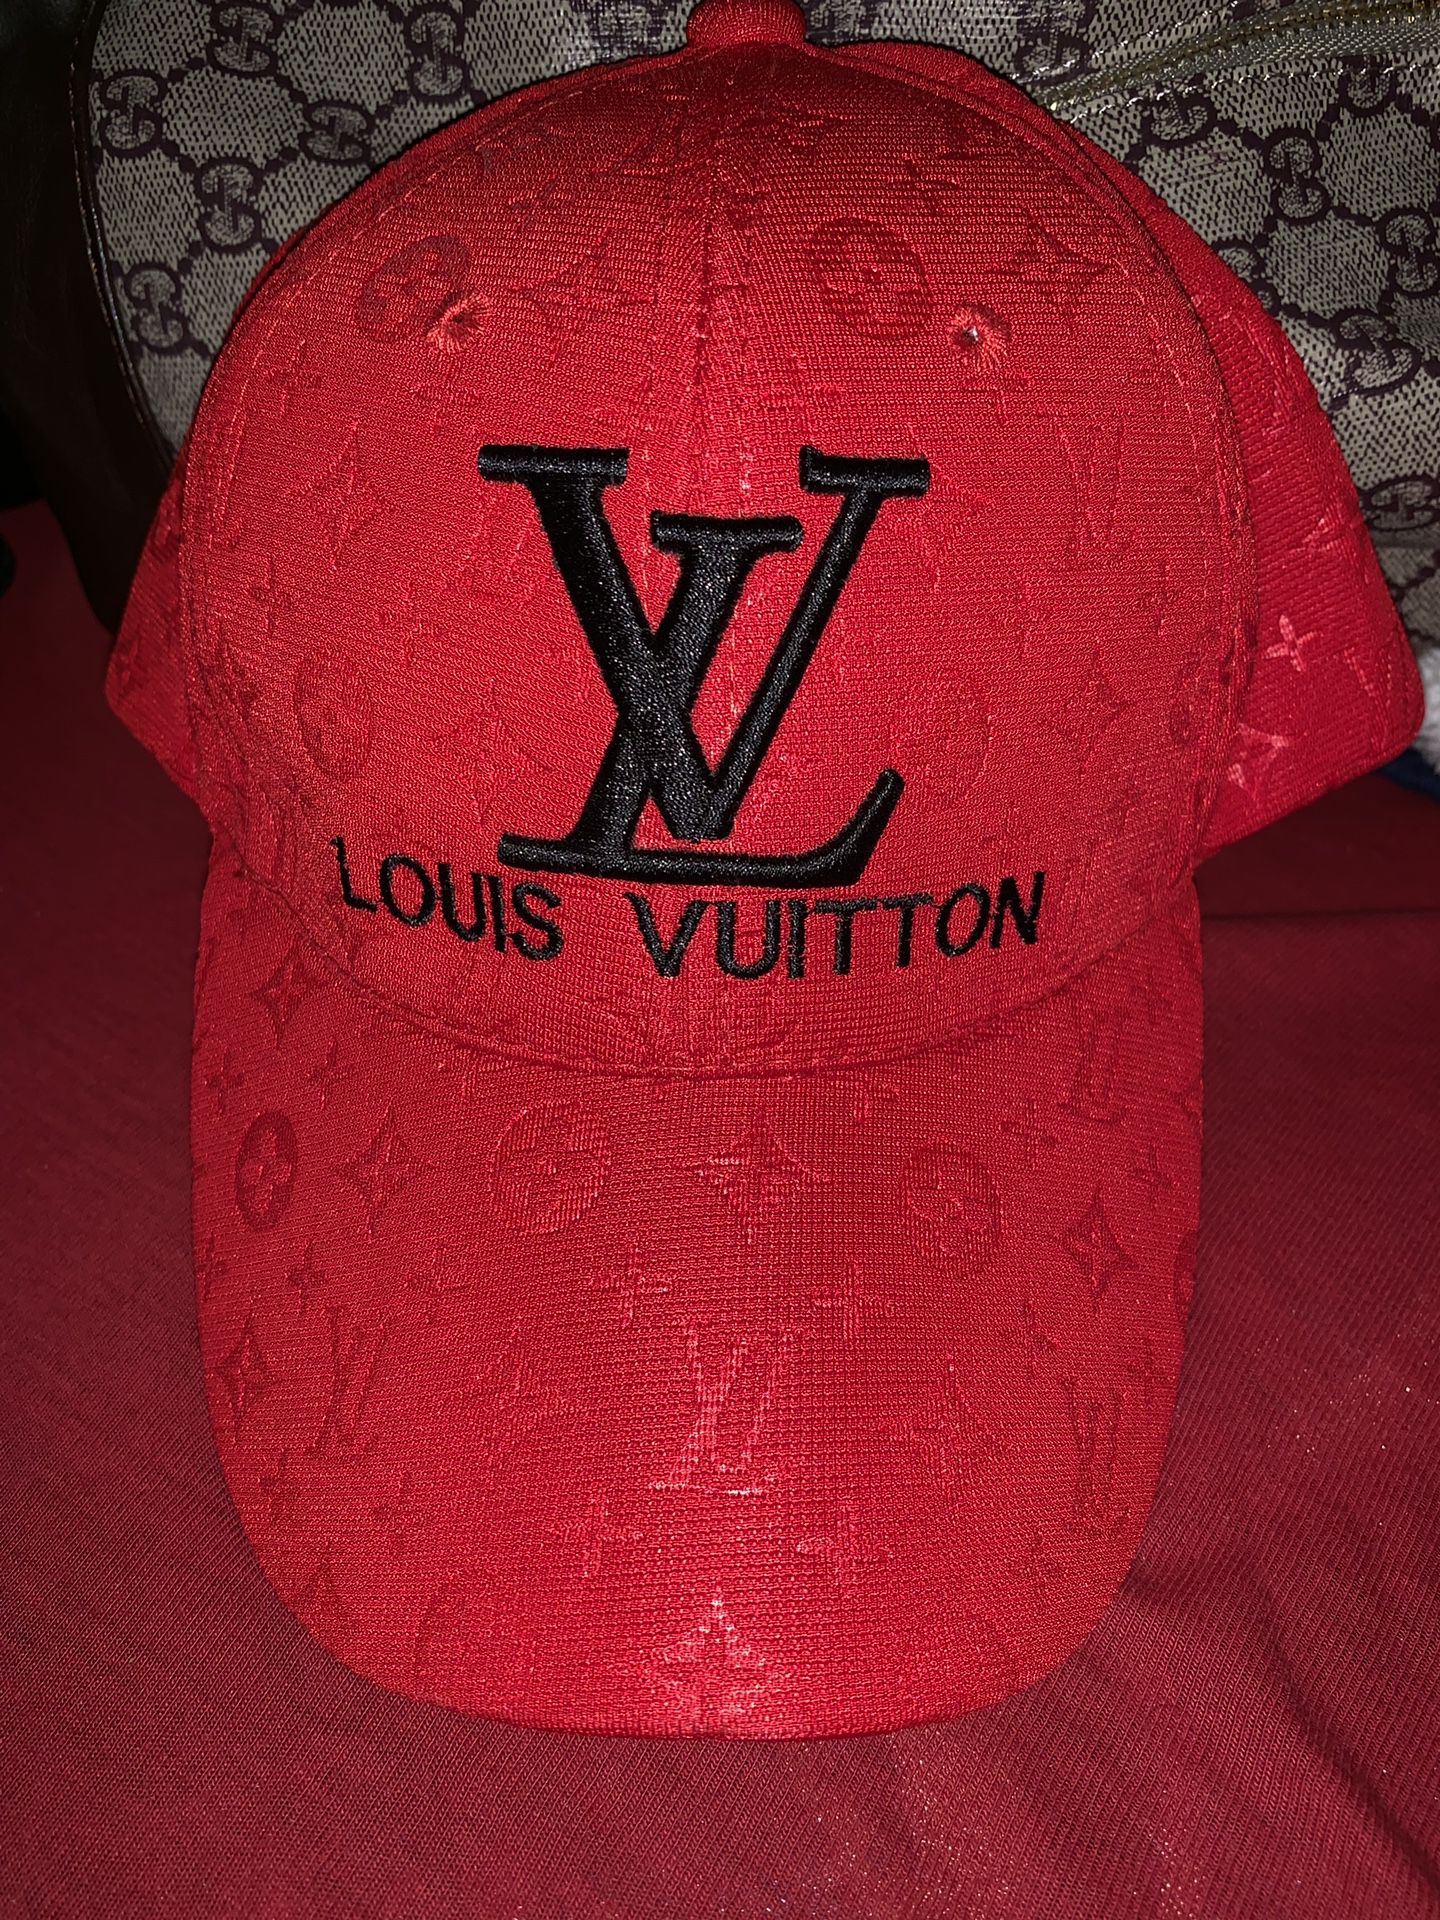 Louis Vuitton hat for sale for Sale in Philadelphia, PA - OfferUp